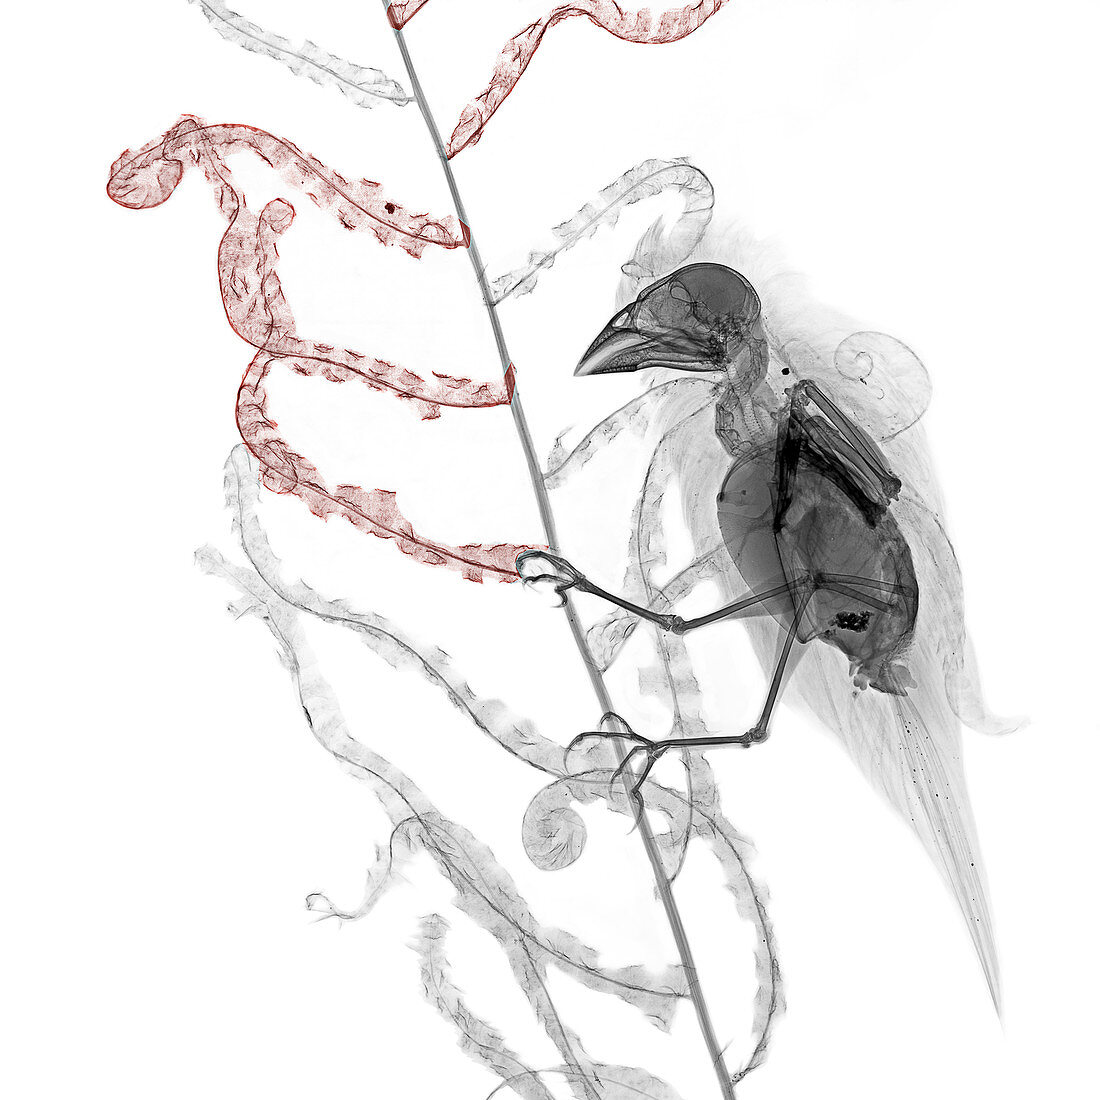 Greenfinch perched on a plant, X-ray